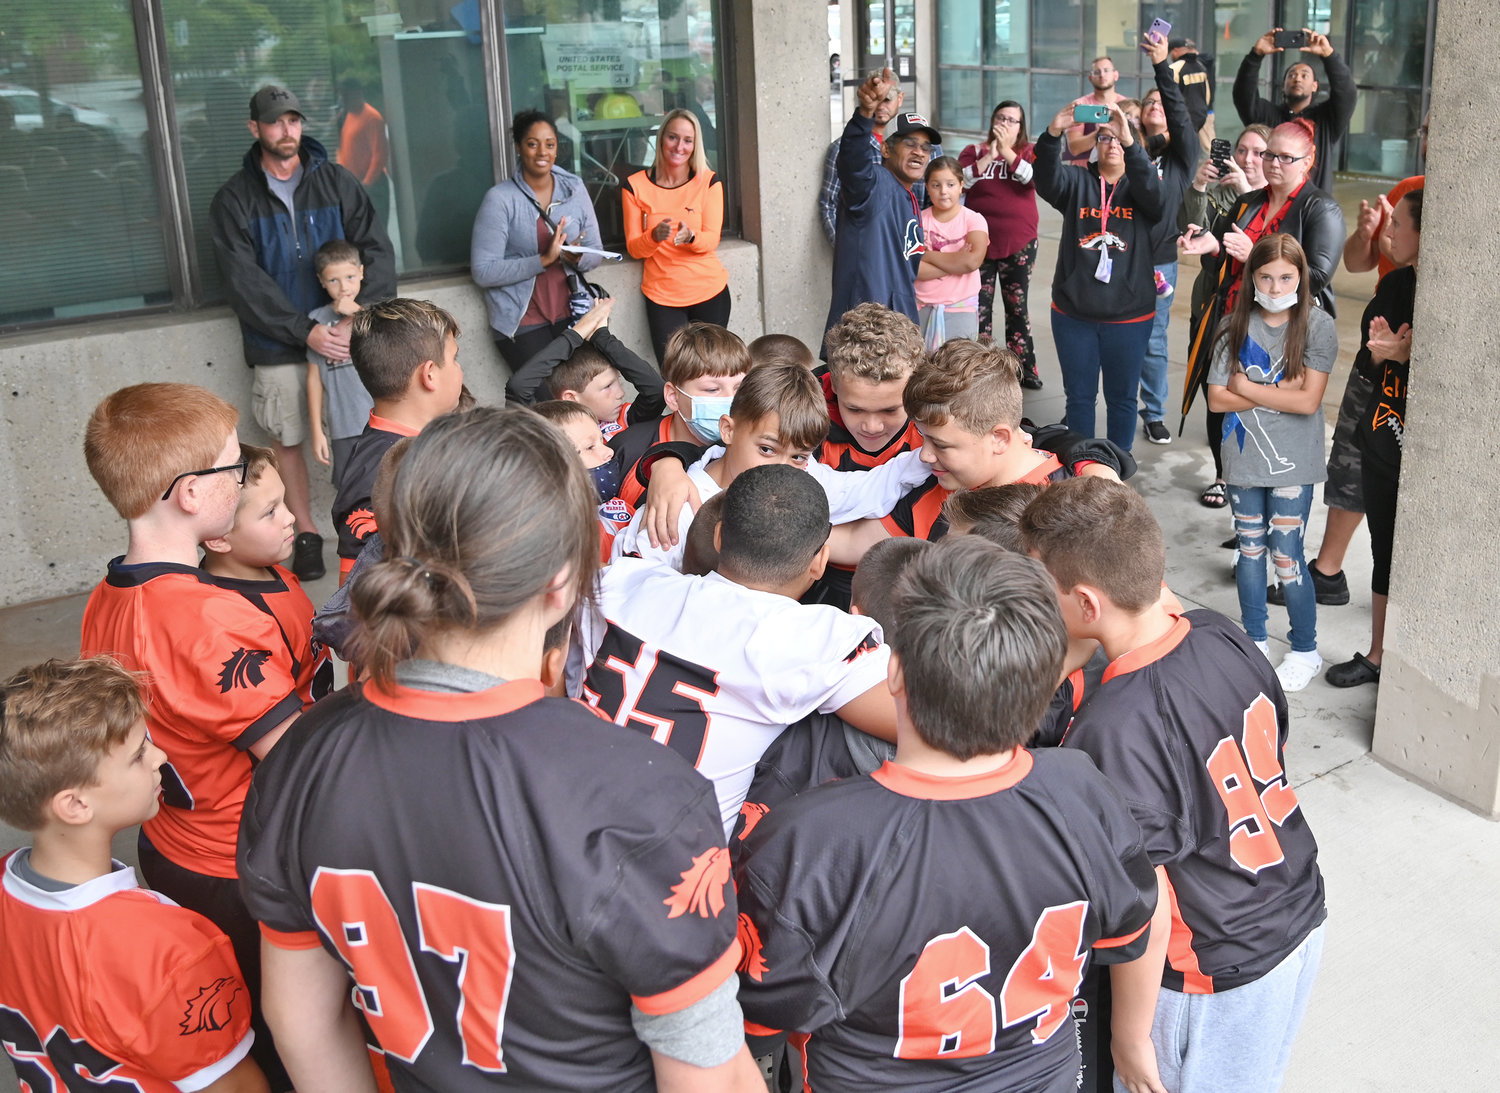 FOOTBALL ON HOLD — Members of the Rome Colts 12U football team huddle up outside City Hall Sept. 23 in hopes that someone would listen to their pleas to be allowed to play again. A fight between spectators at a Rome Colts Pop Warner football game on Sept. 19 is under investigation by law enforcement. As a result of the fight, tackle football has been suspended in Rome for the rest of the season.